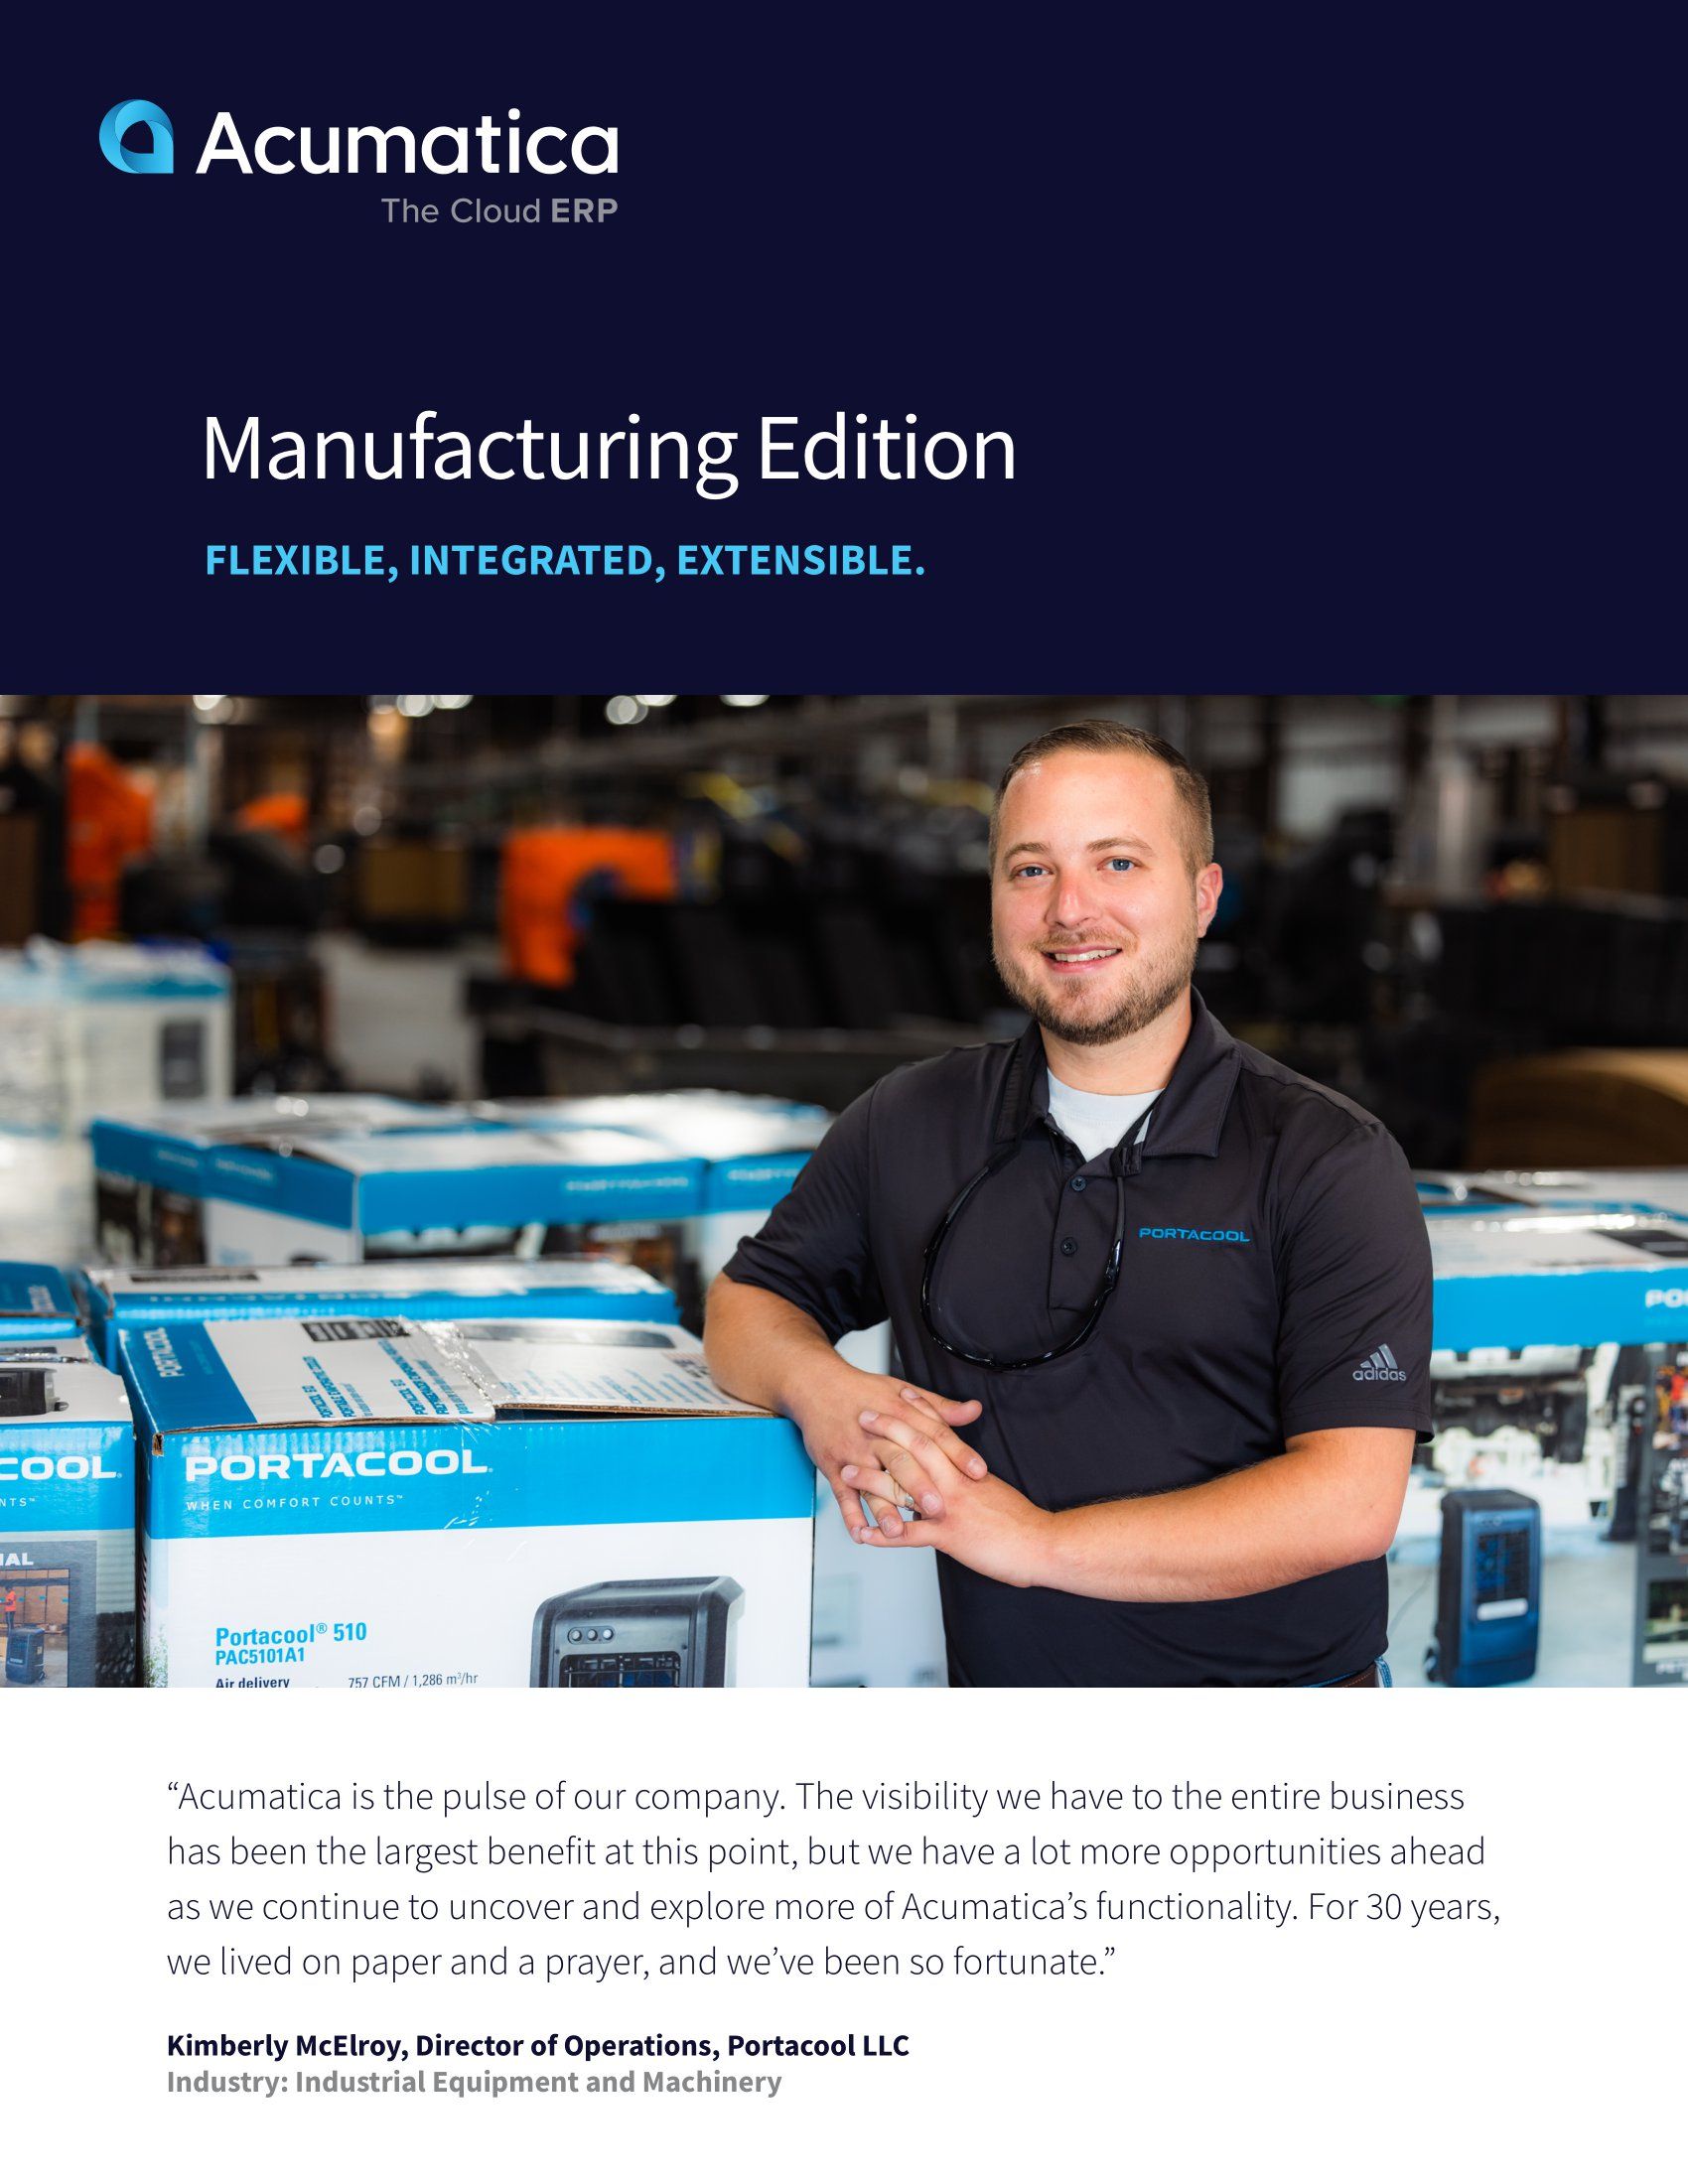 Manufacturing Edition. Flexible, Integrated, Extensible.